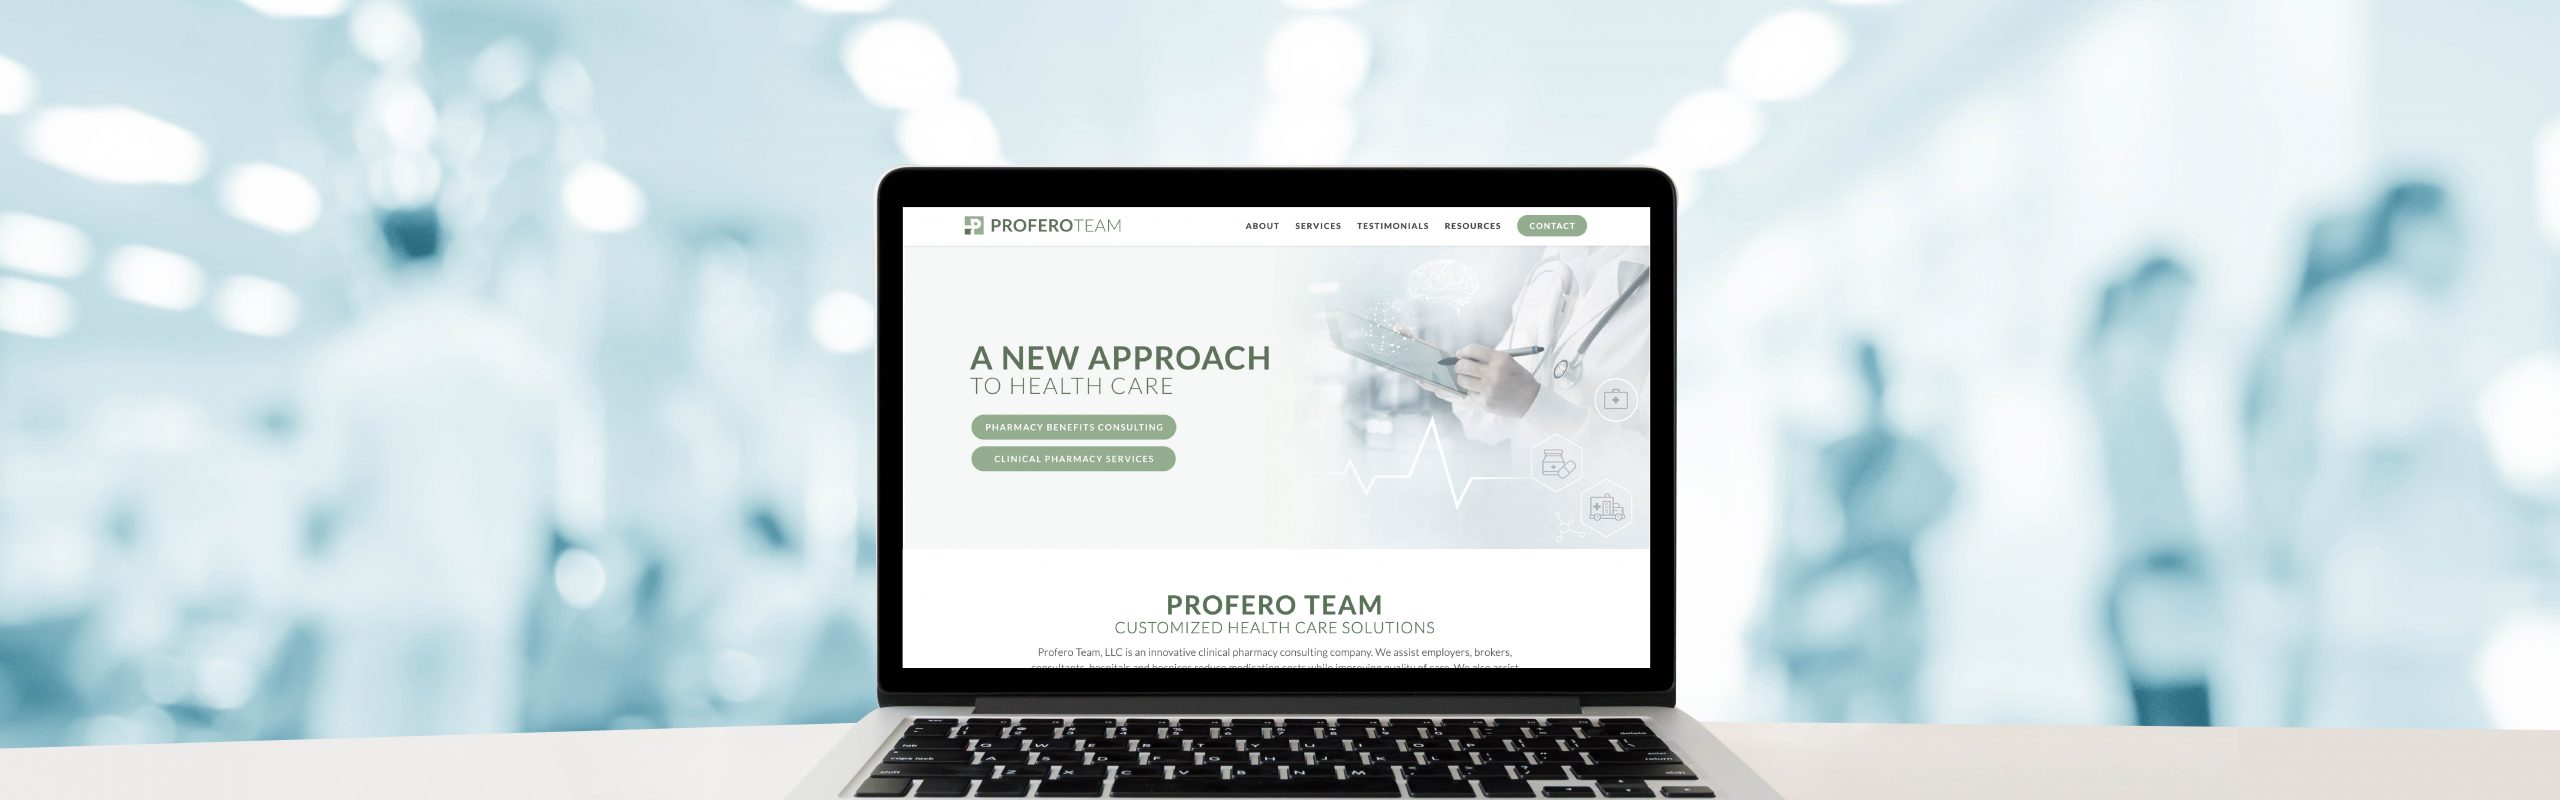 Laptop on a desk displaying a healthcare website with the headline "A new approach to health care, by the Profero Team.